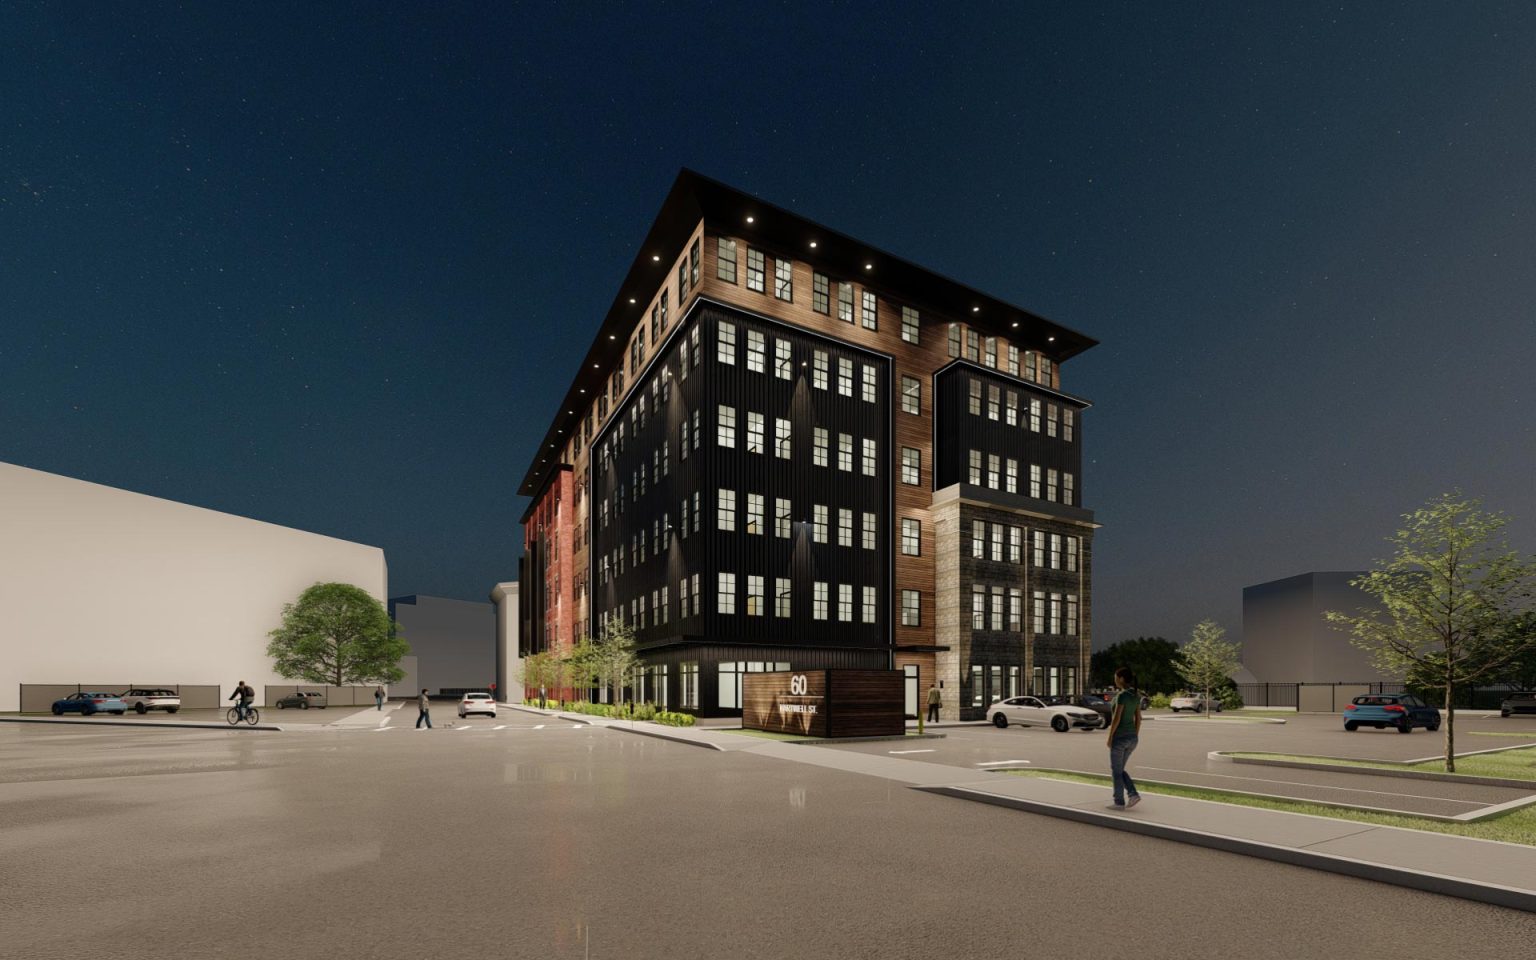 Building design for Lofts at Hartwell Street in Fall River, MA: a six-story, mixed-use building